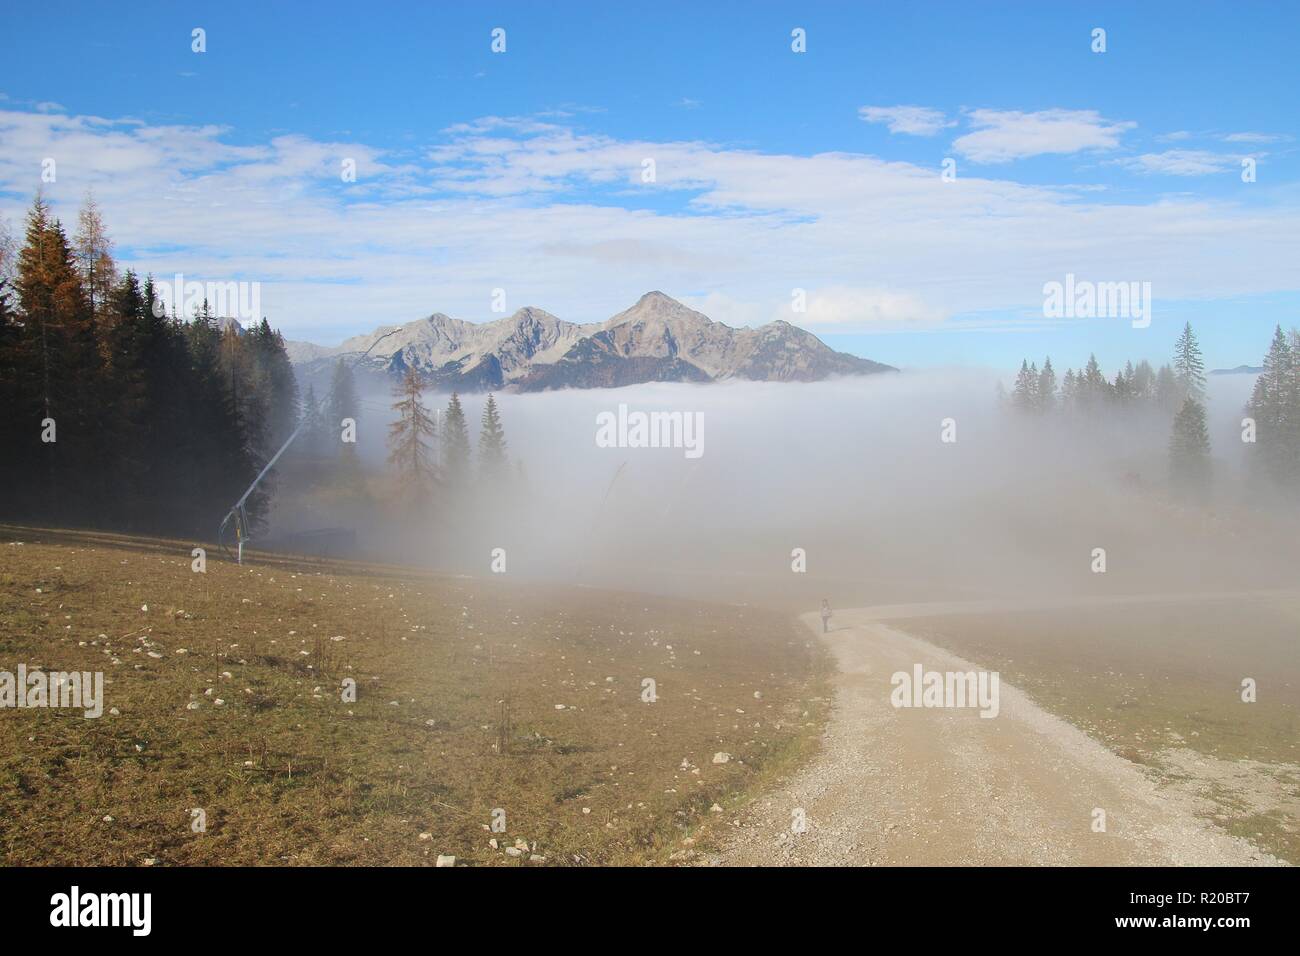 Trail in the mountains in autumn, in the Limestone alps national park, above Hinterstoder. Height 1300 m. A fog layer above the valley. Austria, Europe. Stock Photo